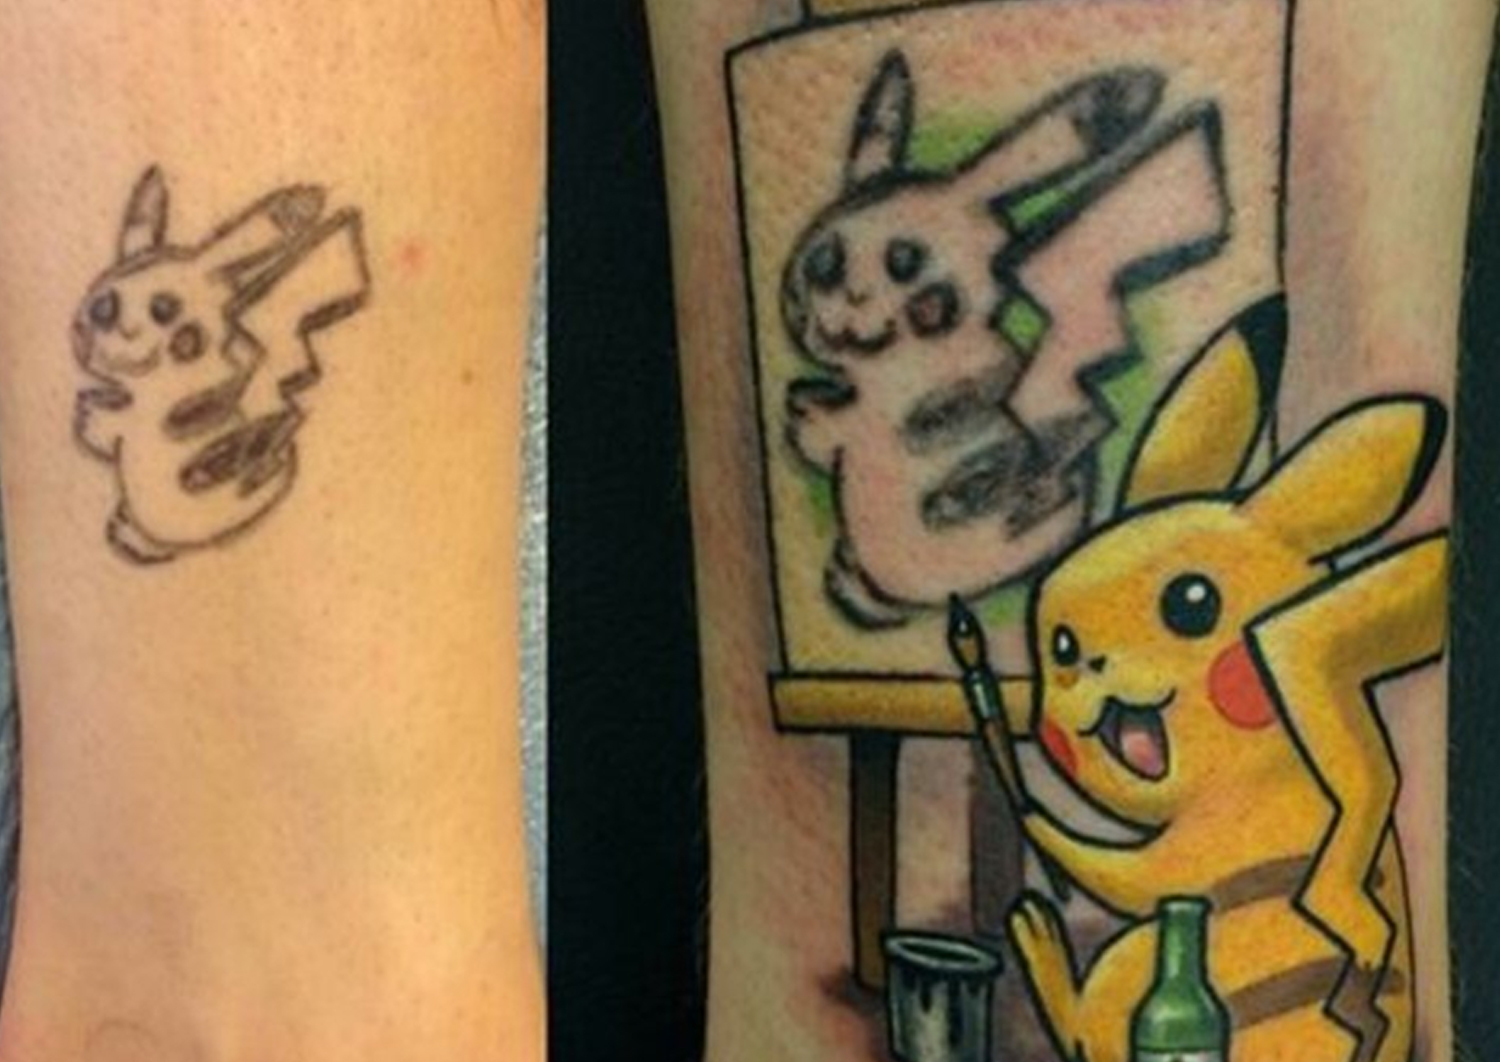 30+ Best Pikachu Tattoo Design Ideas (And What They Mean) - Saved Tattoo